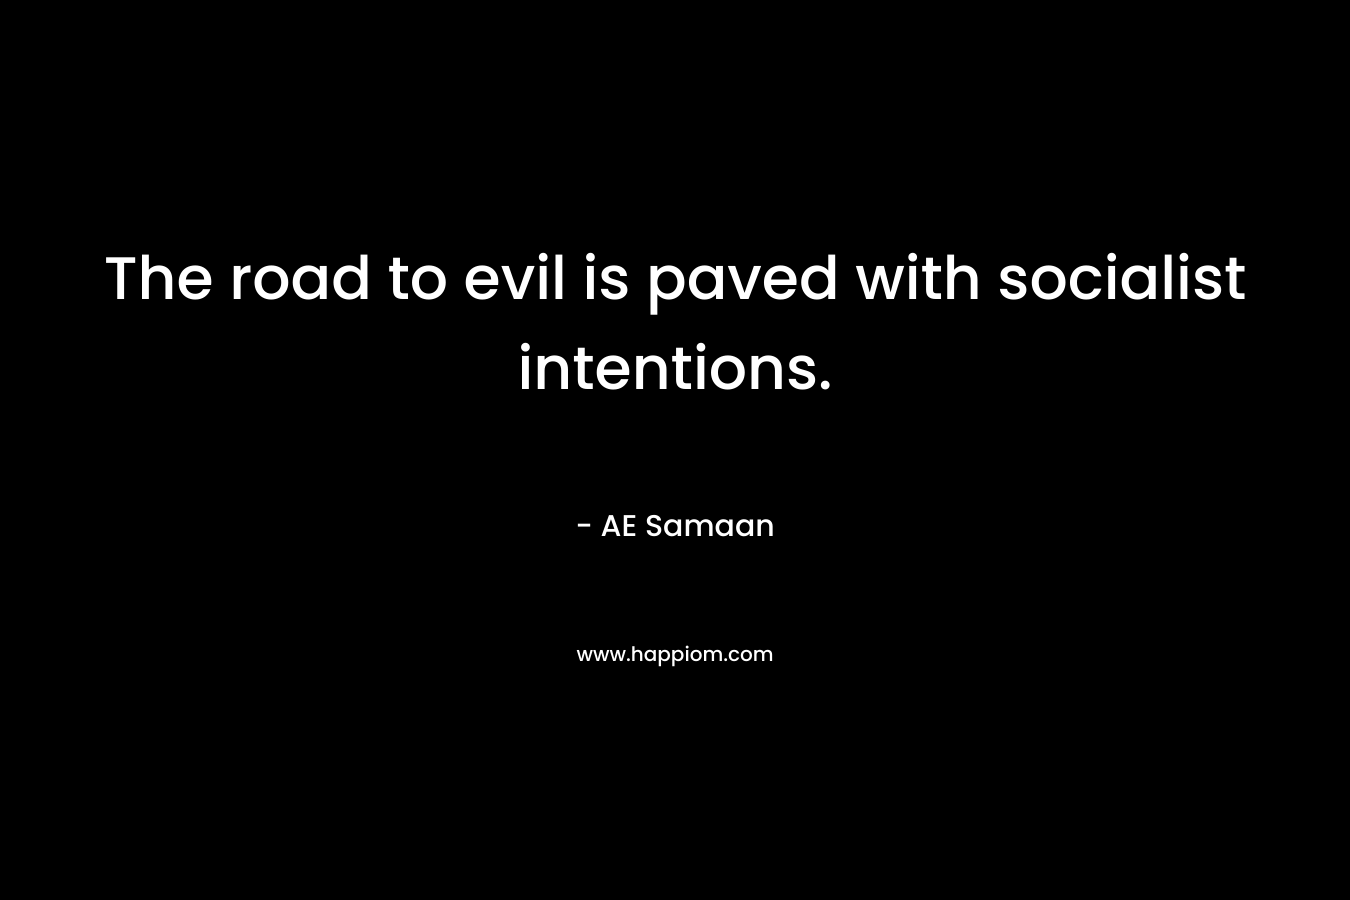 The road to evil is paved with socialist intentions. – AE Samaan